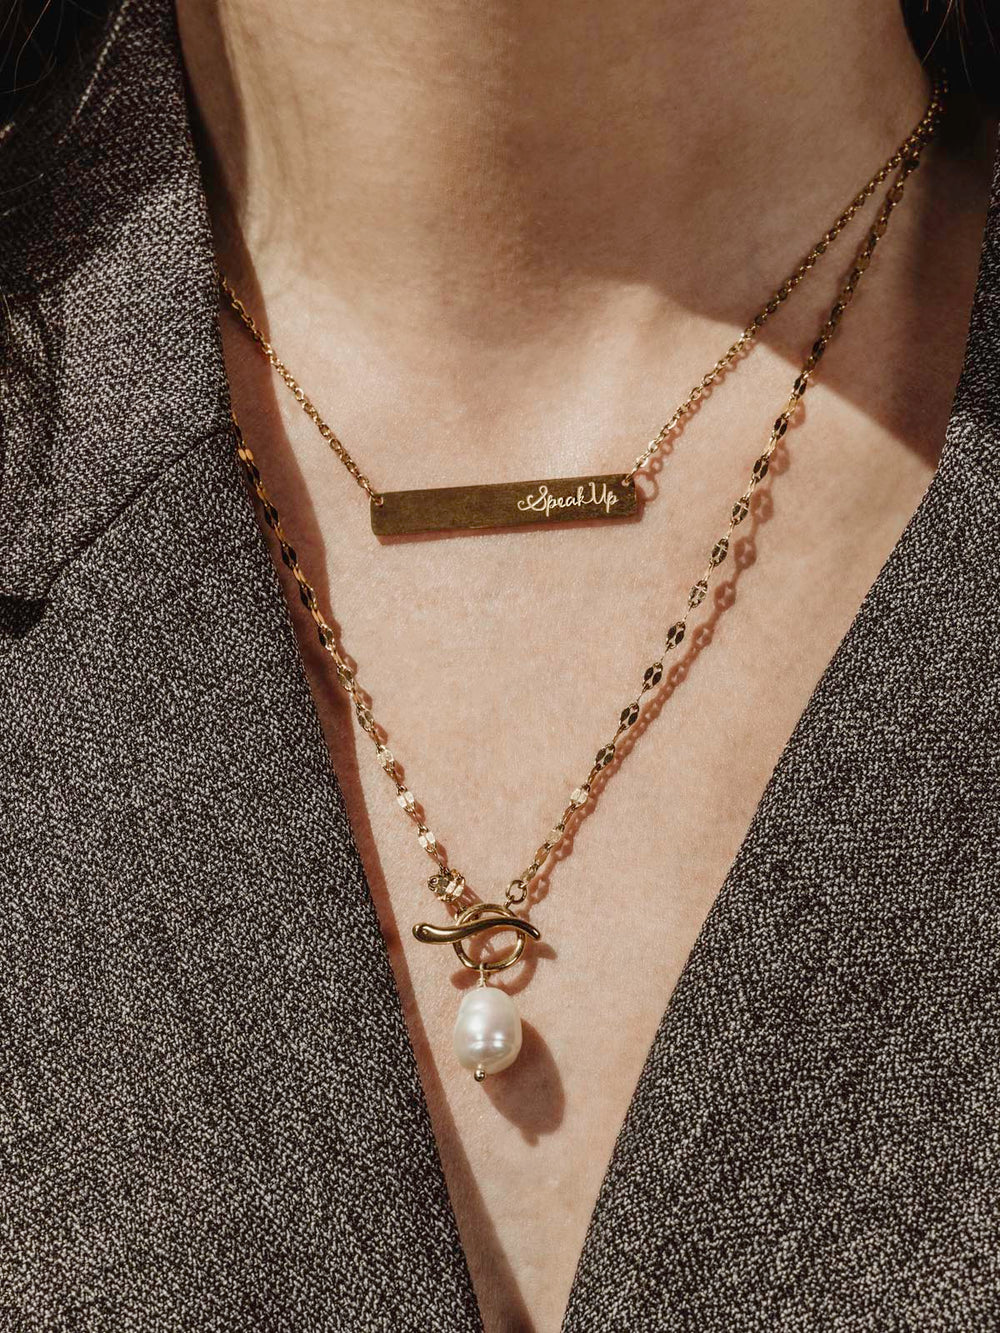 Woman wearing a dark gray blazer with two gold necklaces on. One is gold with the words speak up engraved on it and one is gold chain with a pearl pendent 